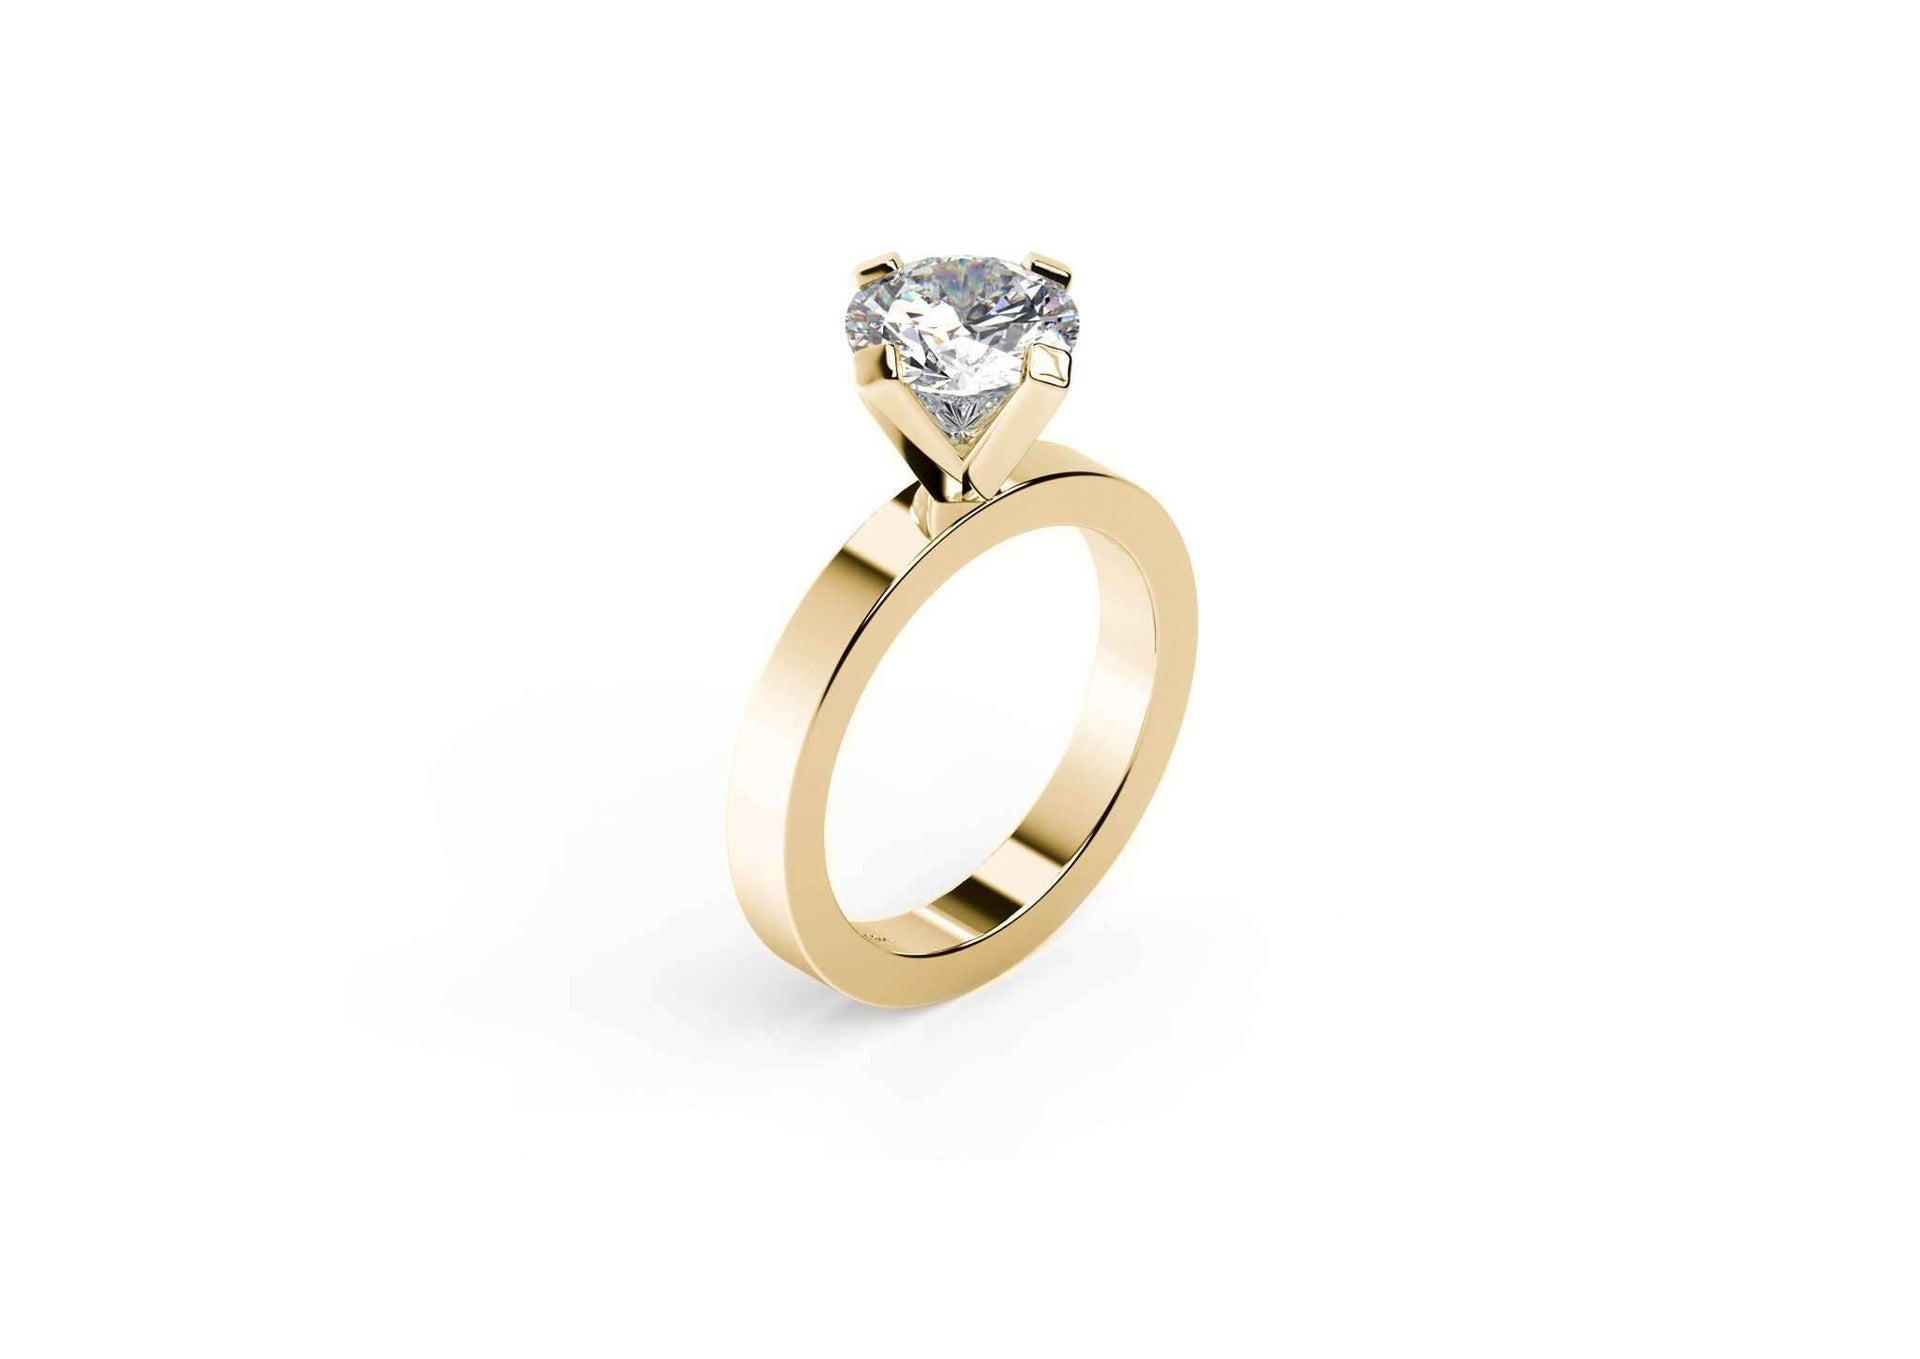 The Jens Hansen Solitaire, Yellow Gold